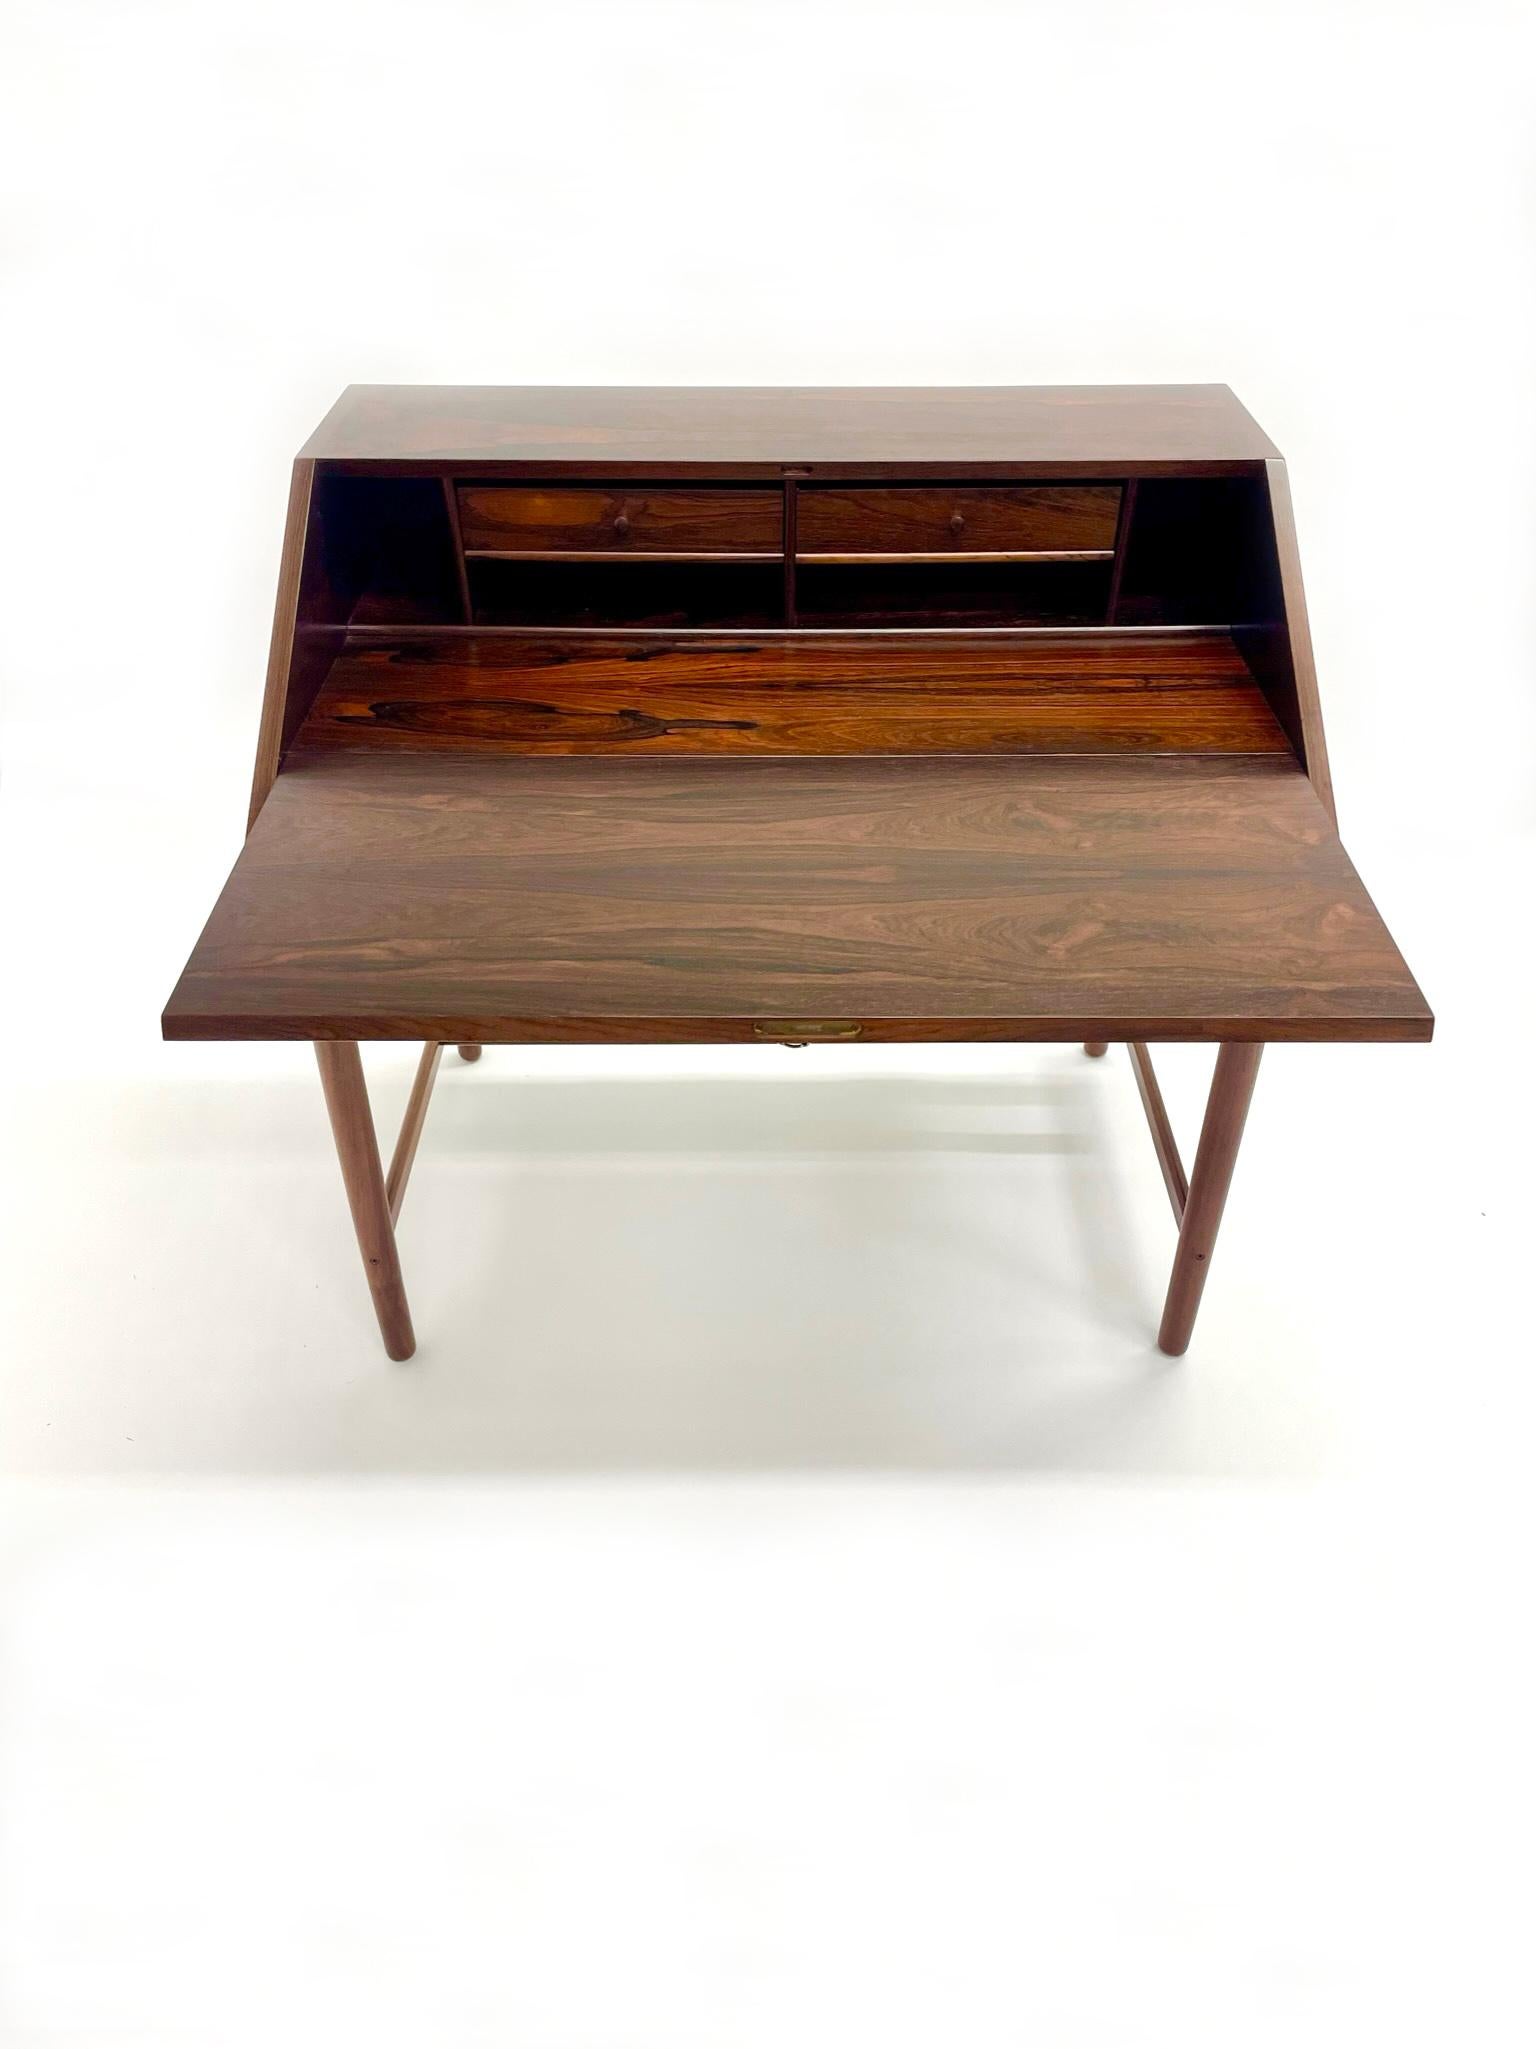 Rare hand-crafted rosewood desk designed by Torbjorn Afdal for Bruksbo. The drawers made with very fine detailed zipper joinery. With original key and working lock mechanism. Original key and lock in working condition.

Has been completely restored.